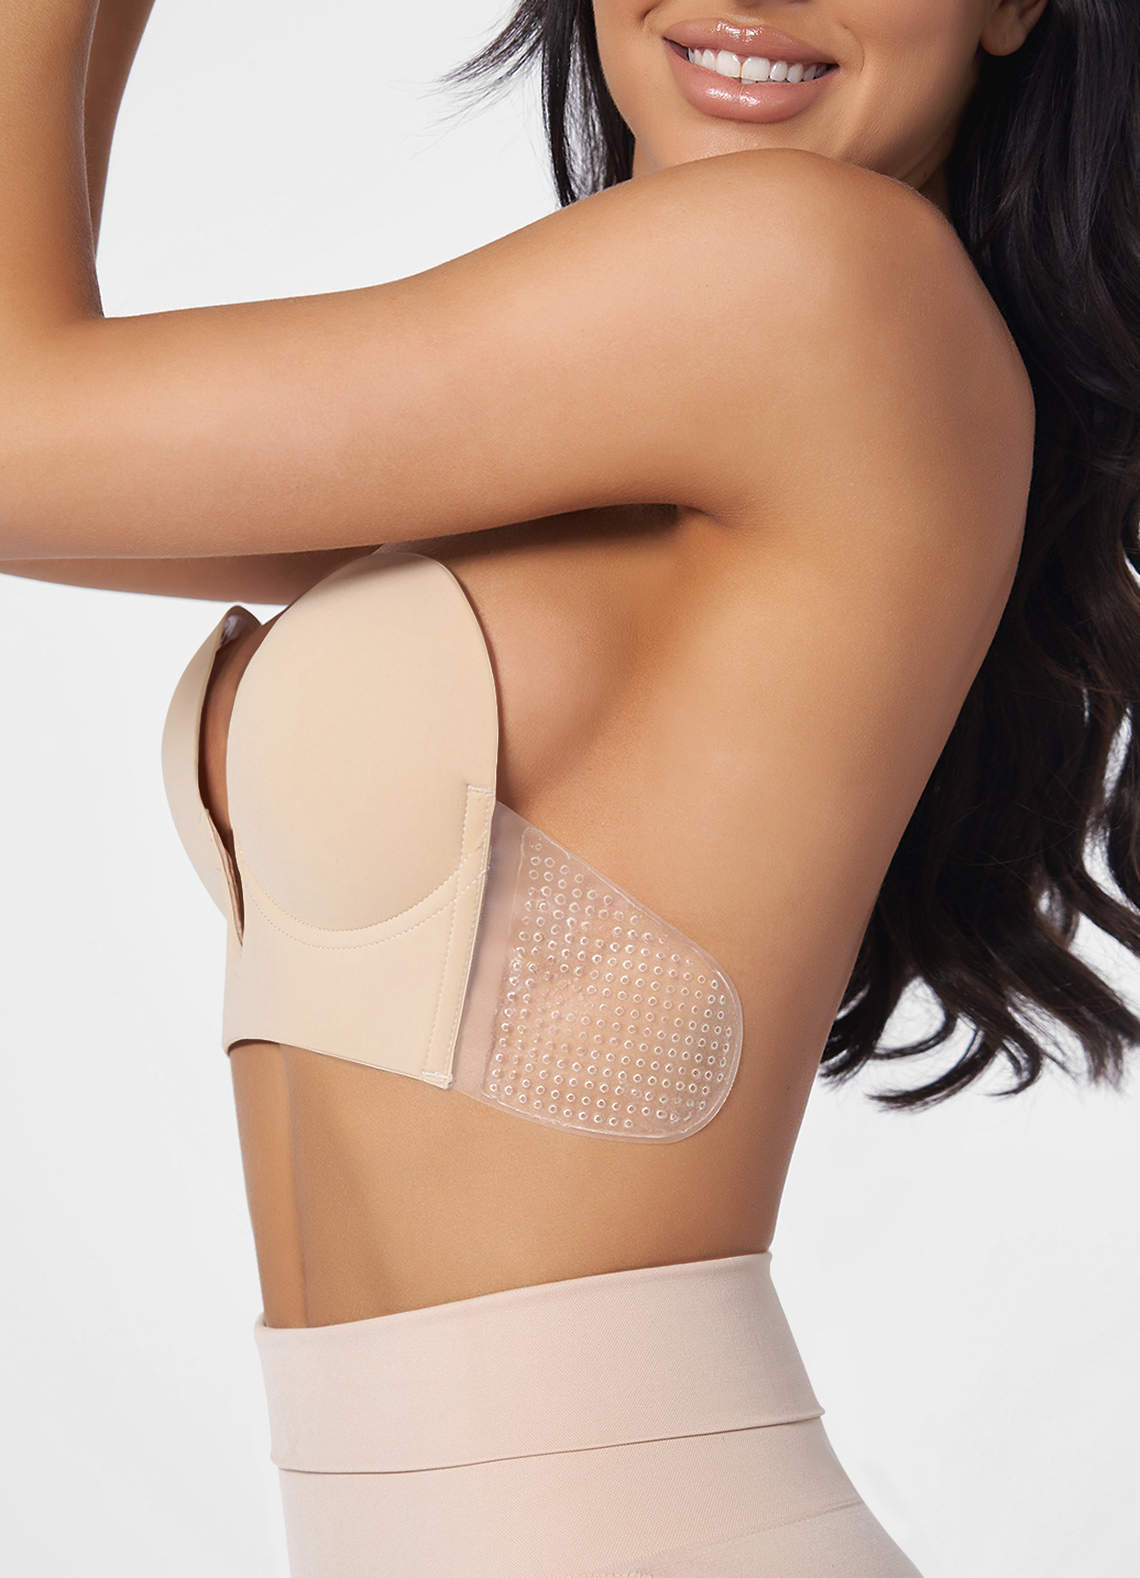 Sneaky Vaunt: A strapless, backless bra that apparently doesn't work. :  r/ABraThatFits